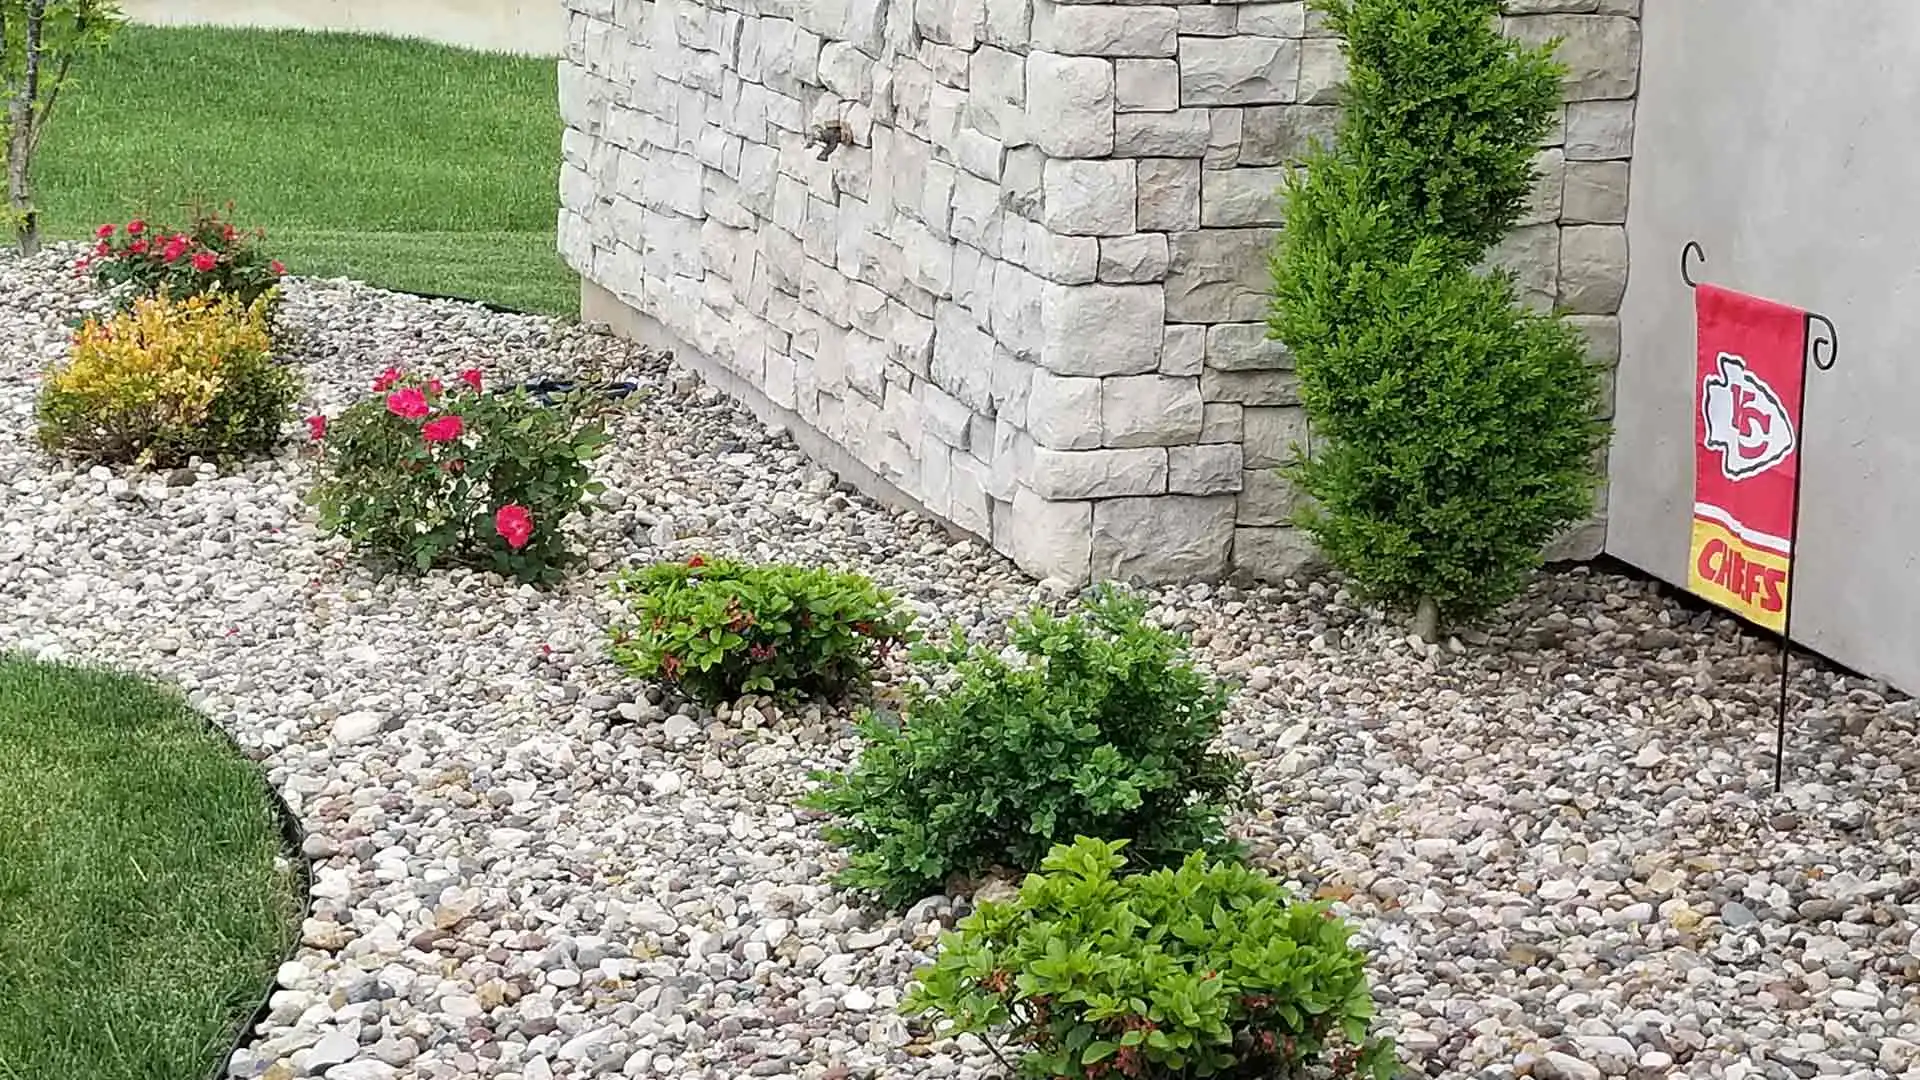 Ground covering by McVey Mowing at Columbia, MO home's front yard with flowers and river gravel.